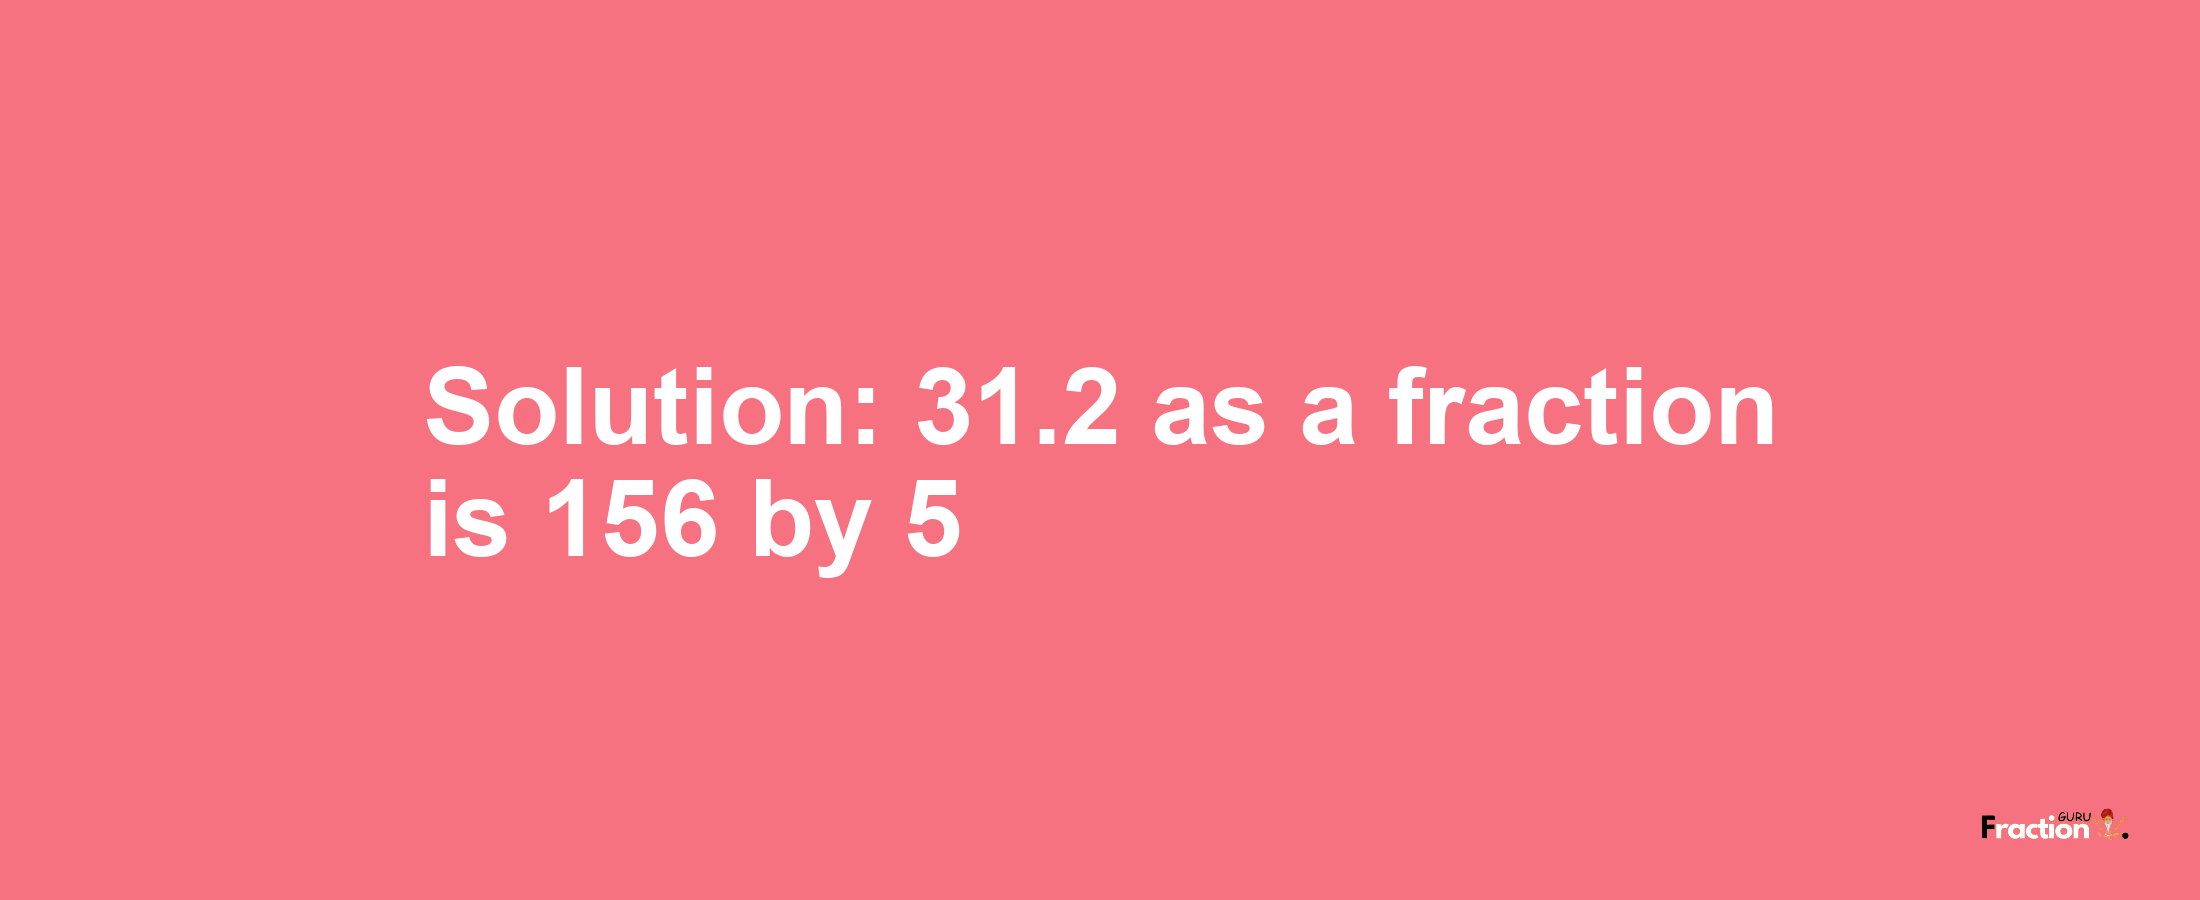 Solution:31.2 as a fraction is 156/5